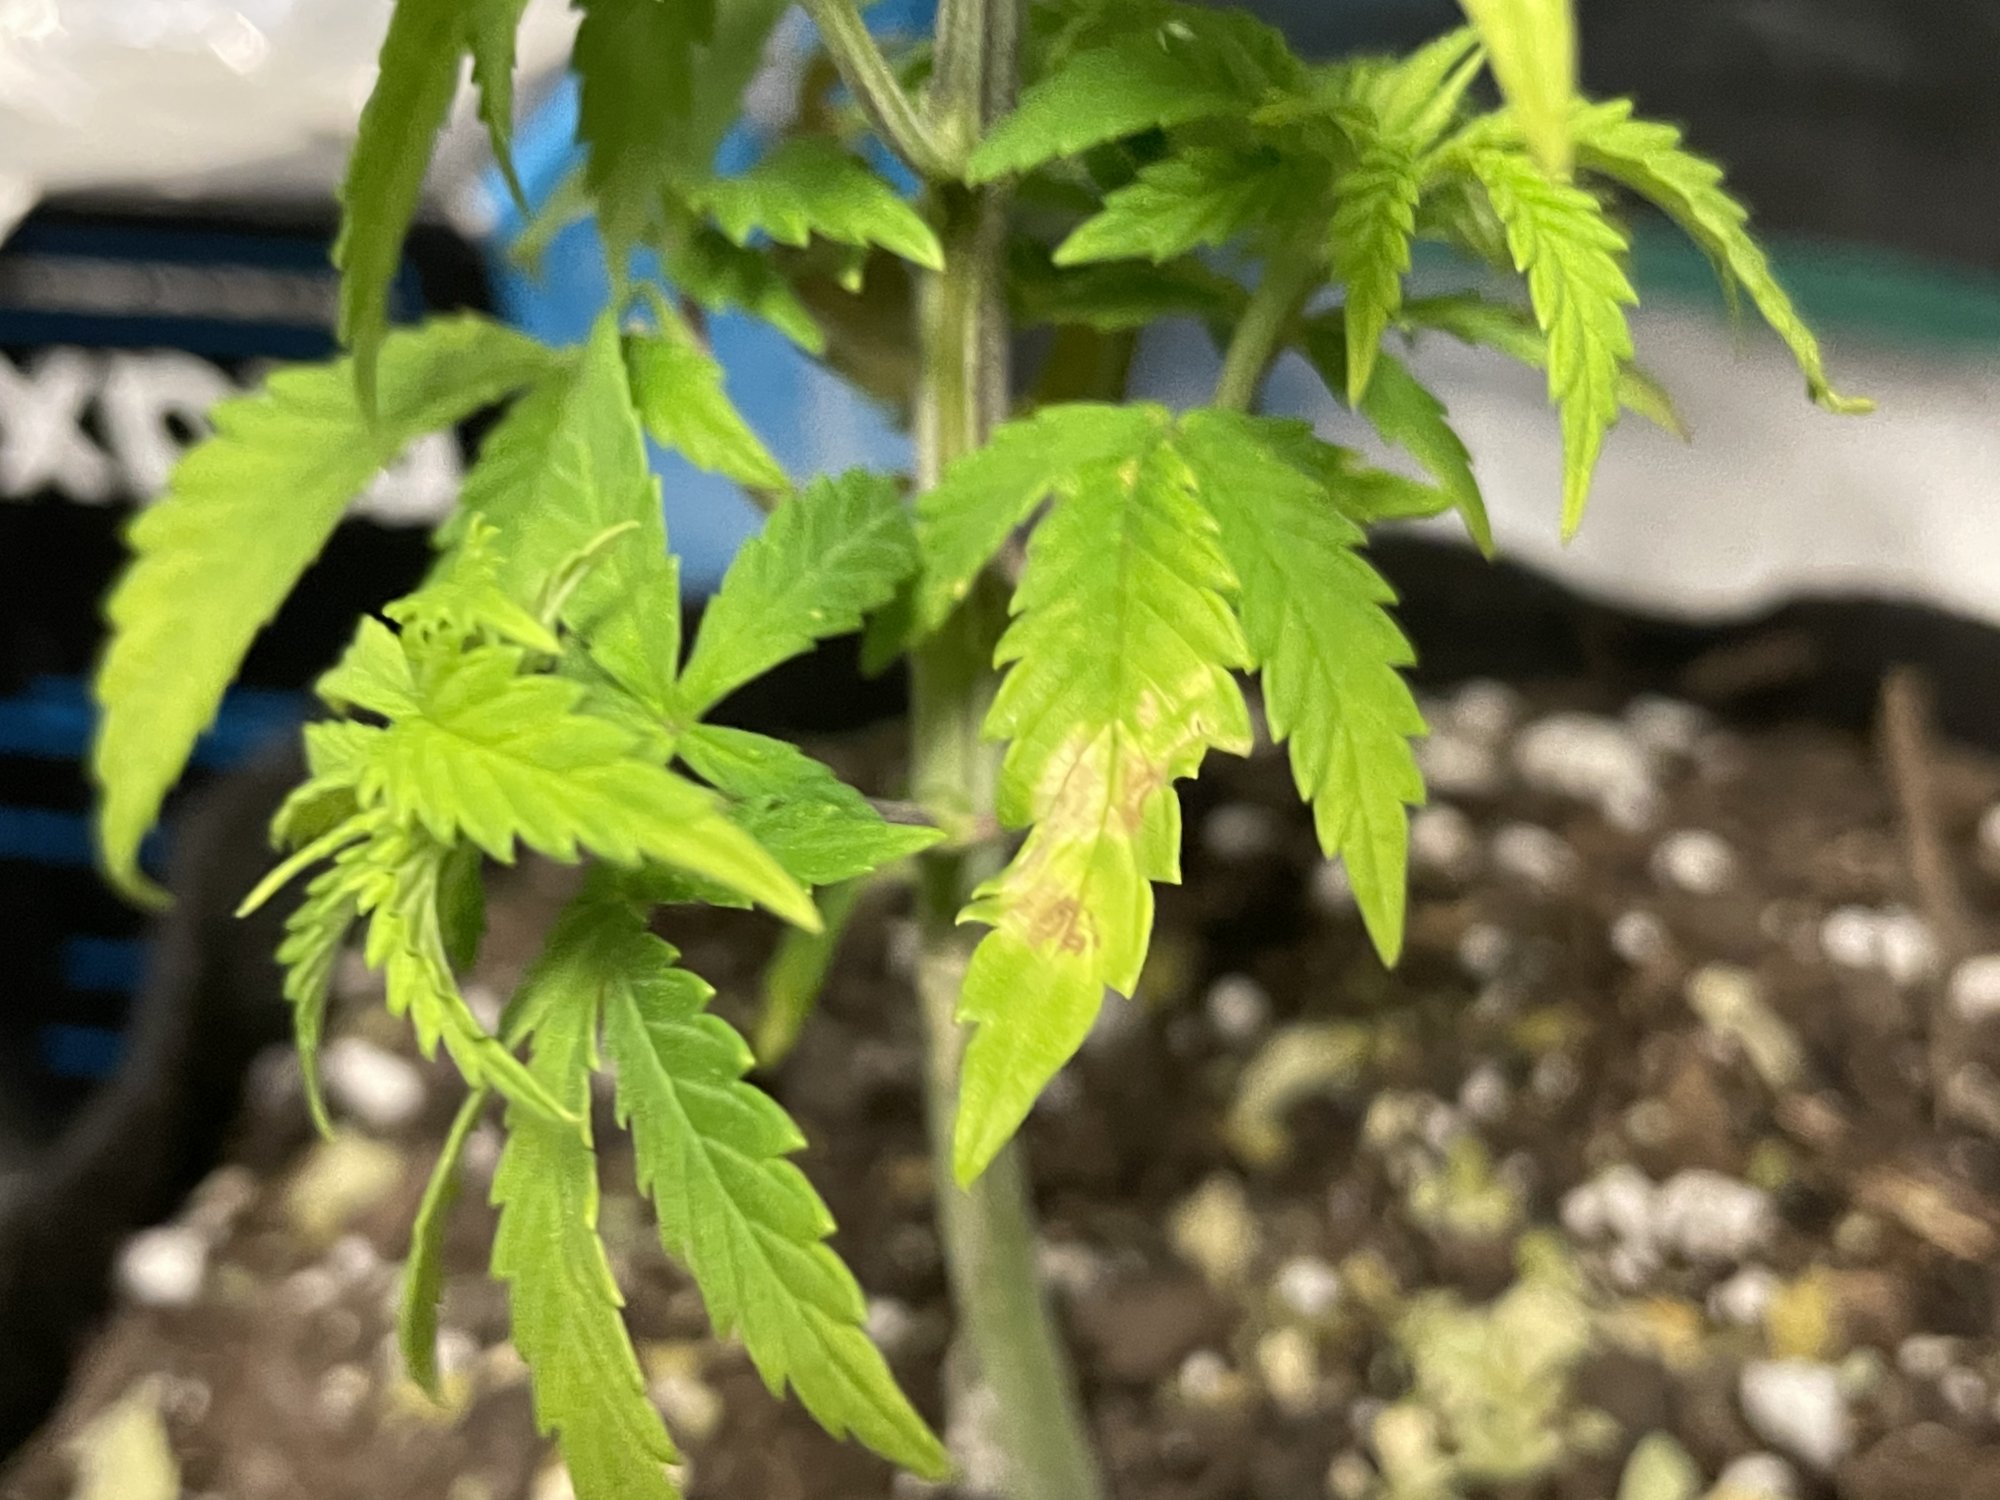 Long time smoker first time grower any advice appreciated 15